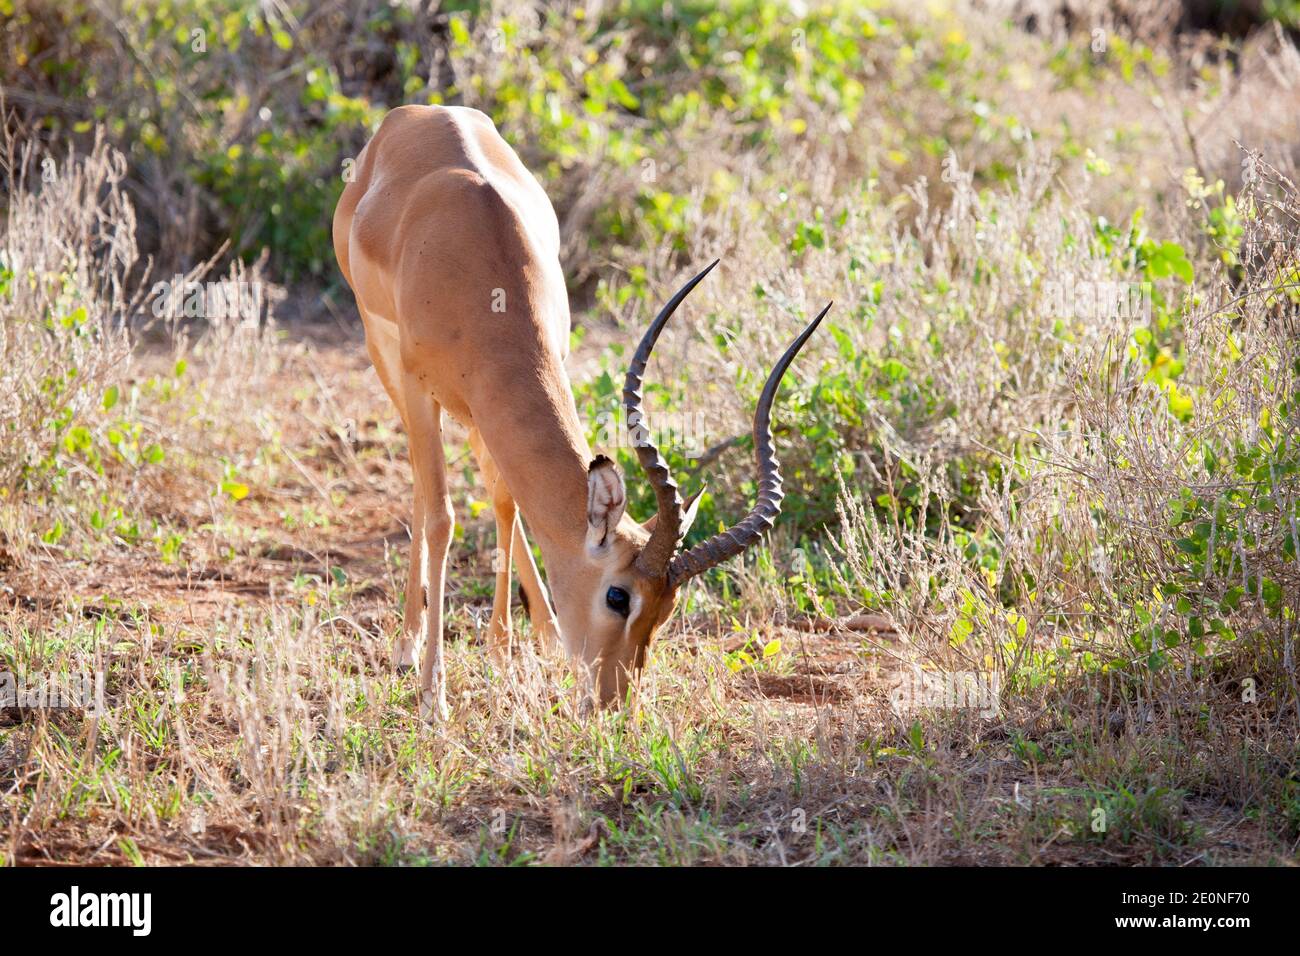 Antelope is eating grass in the scenery of Kenya. Stock Photo